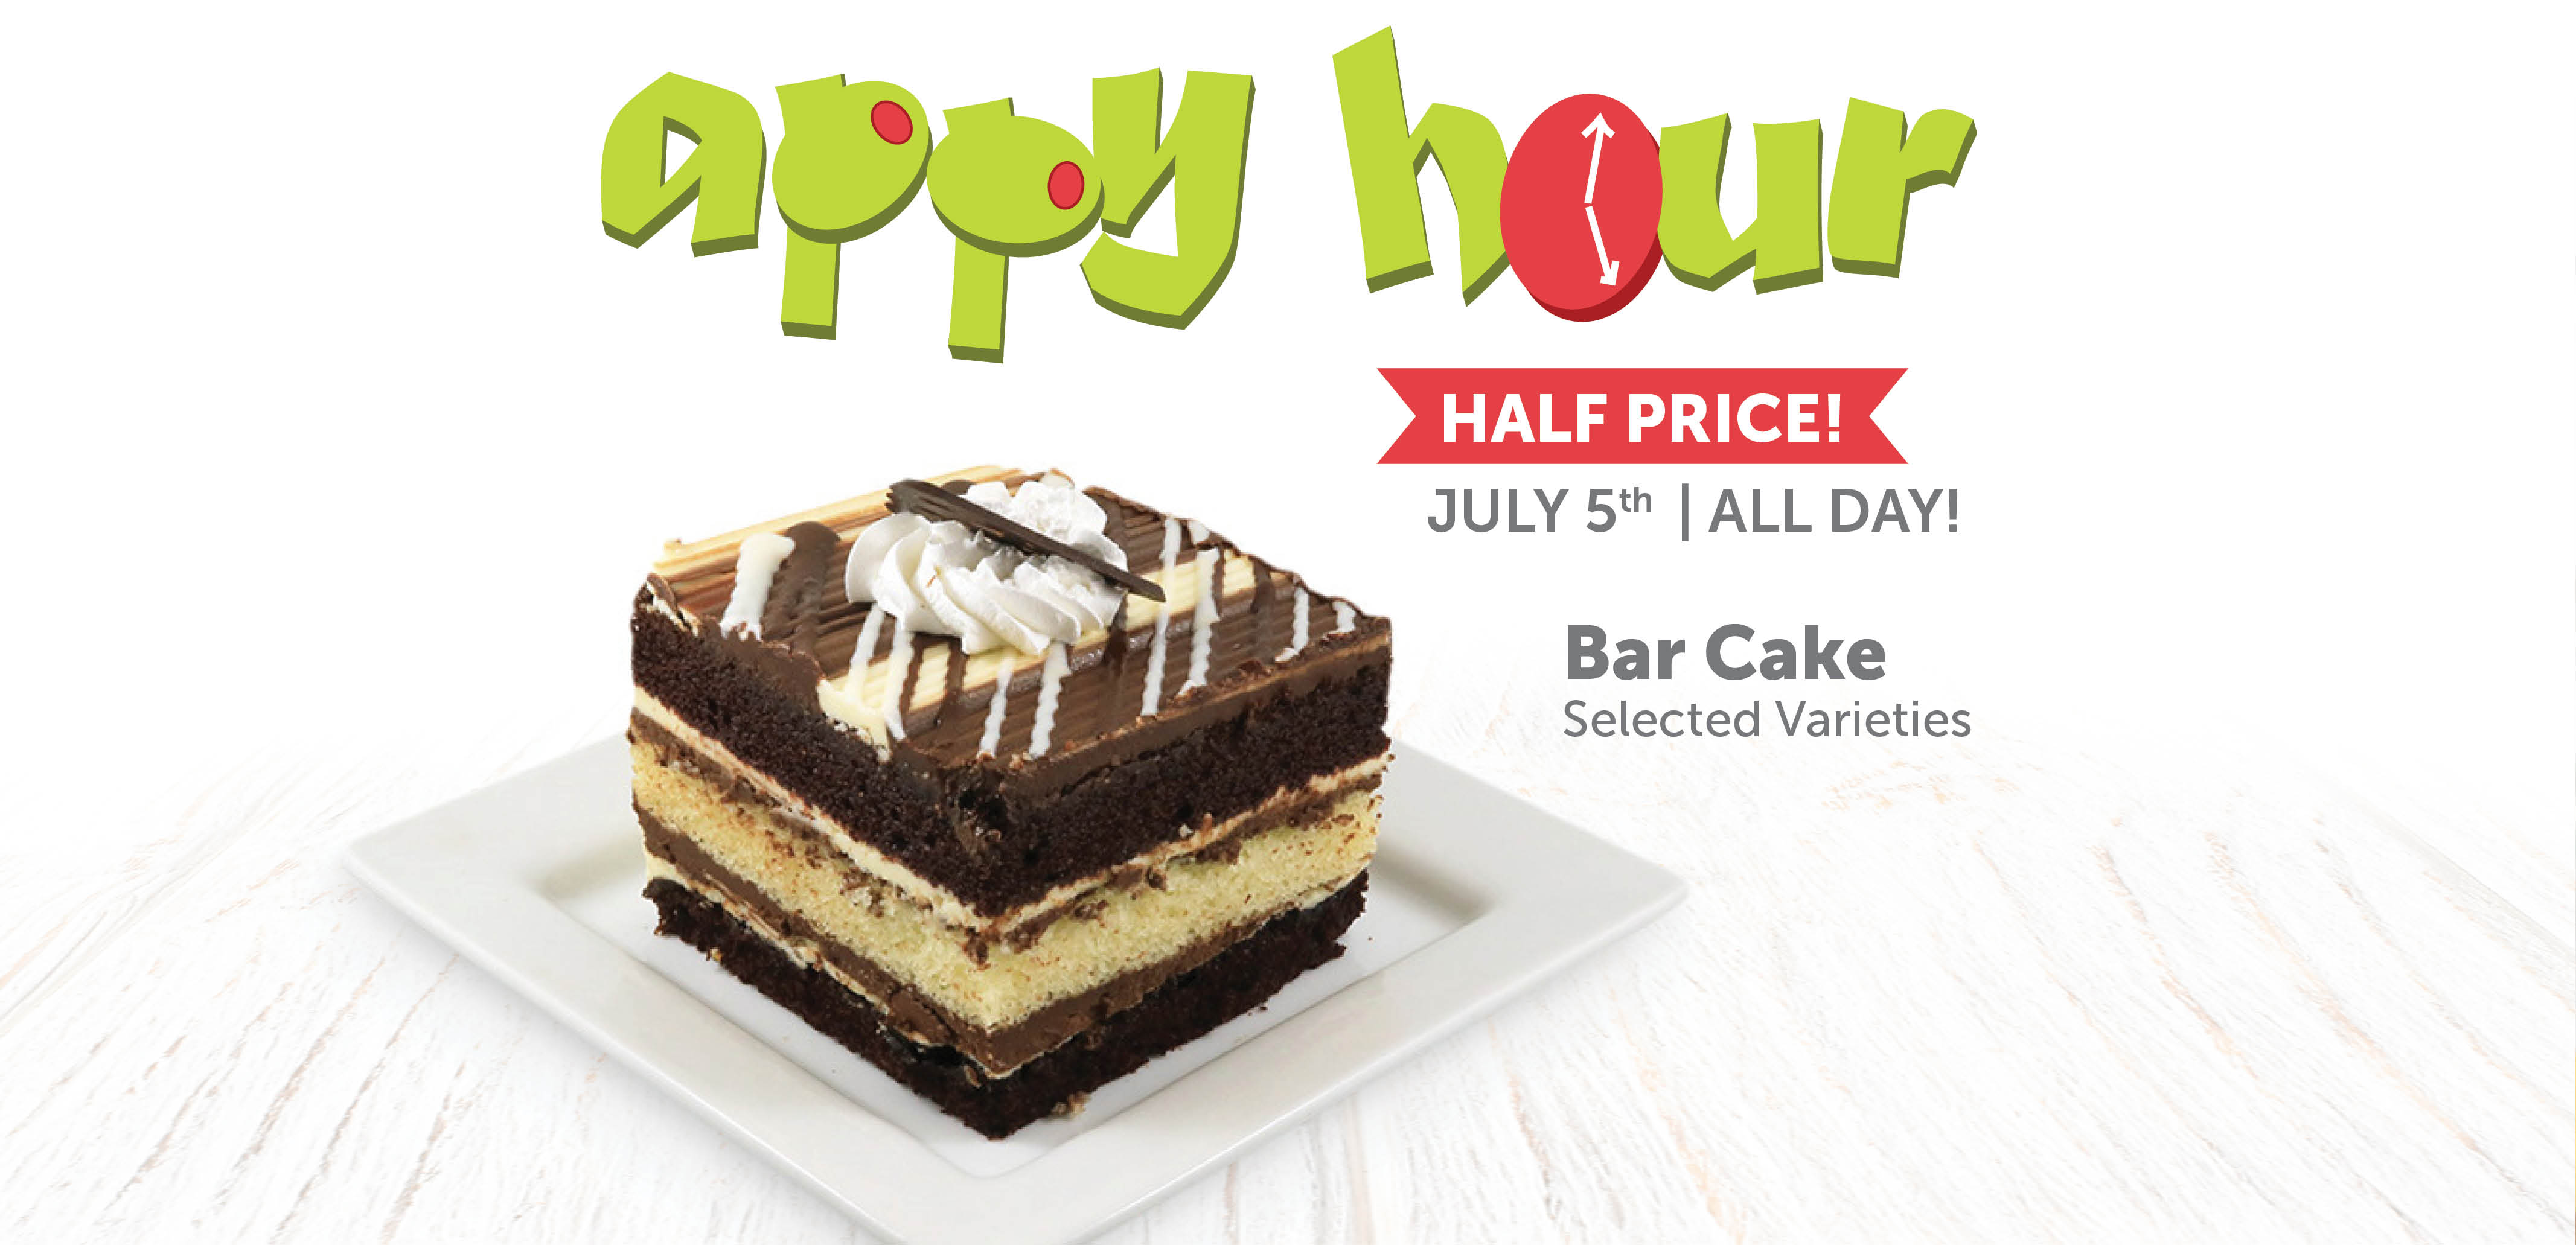 Today's Appy Hour Special – Half Price All Day!